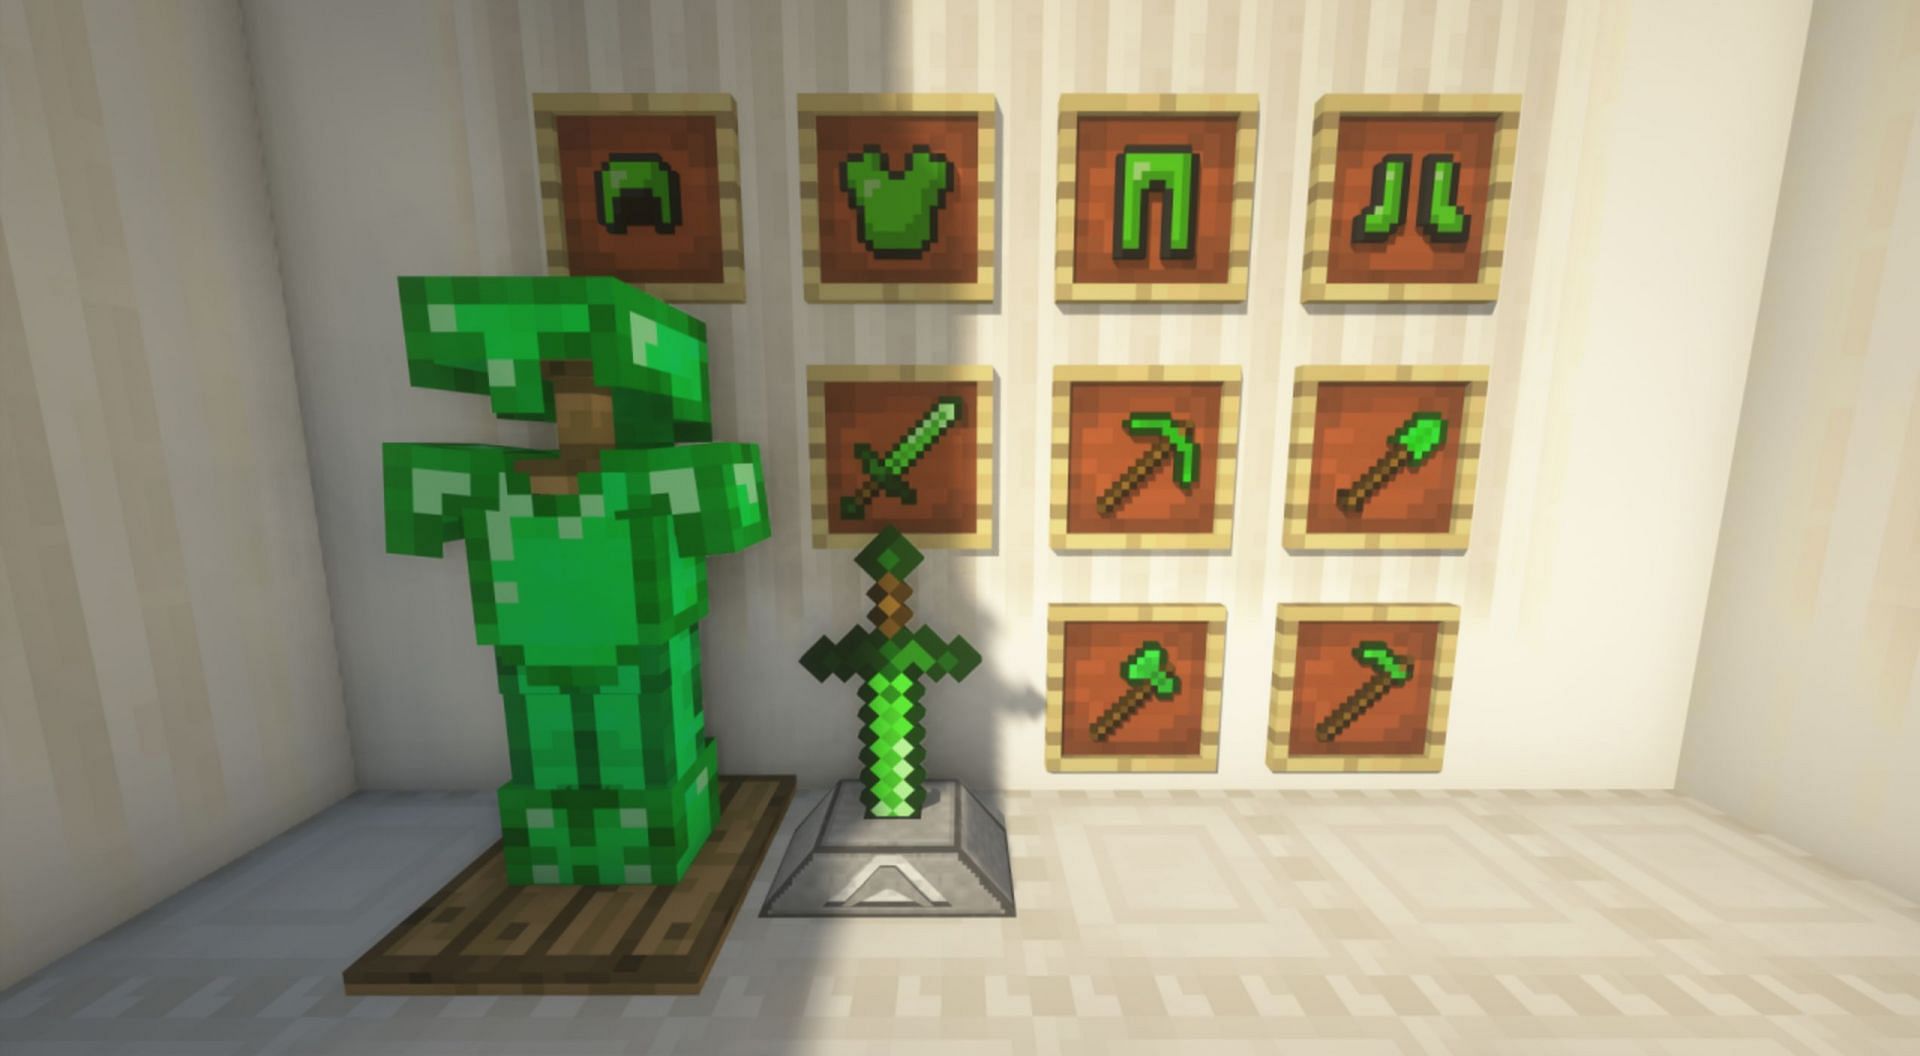 Emerald Equipment significantly expands the use of emeralds in-game (Image via Seltak-Studio/PlanetMinecraft)